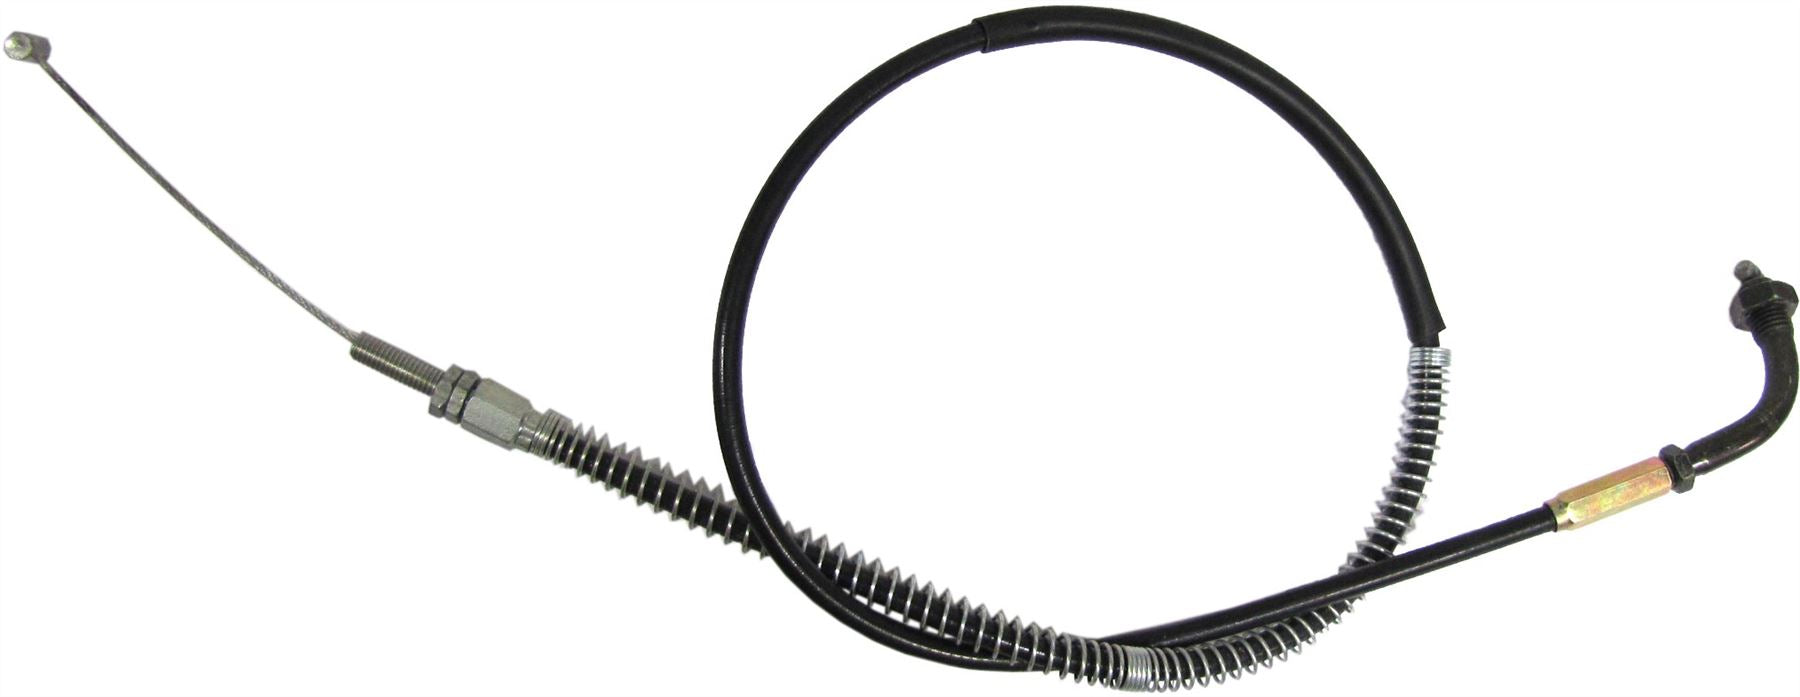 Throttle Cable Fits Honda CD 250 1988-1989